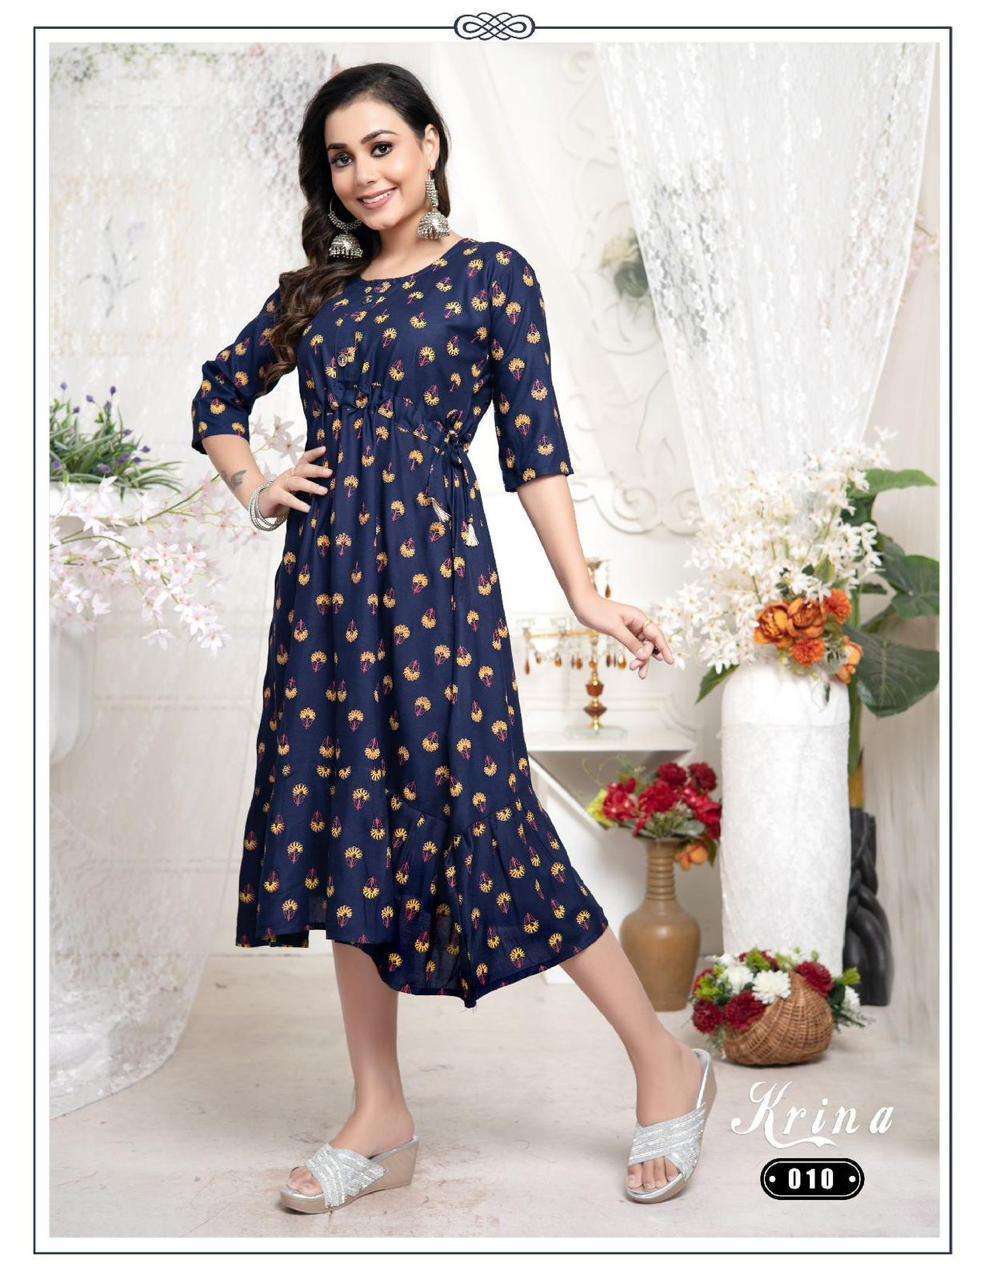 How to find wholesale kurti manufacturers - Quora